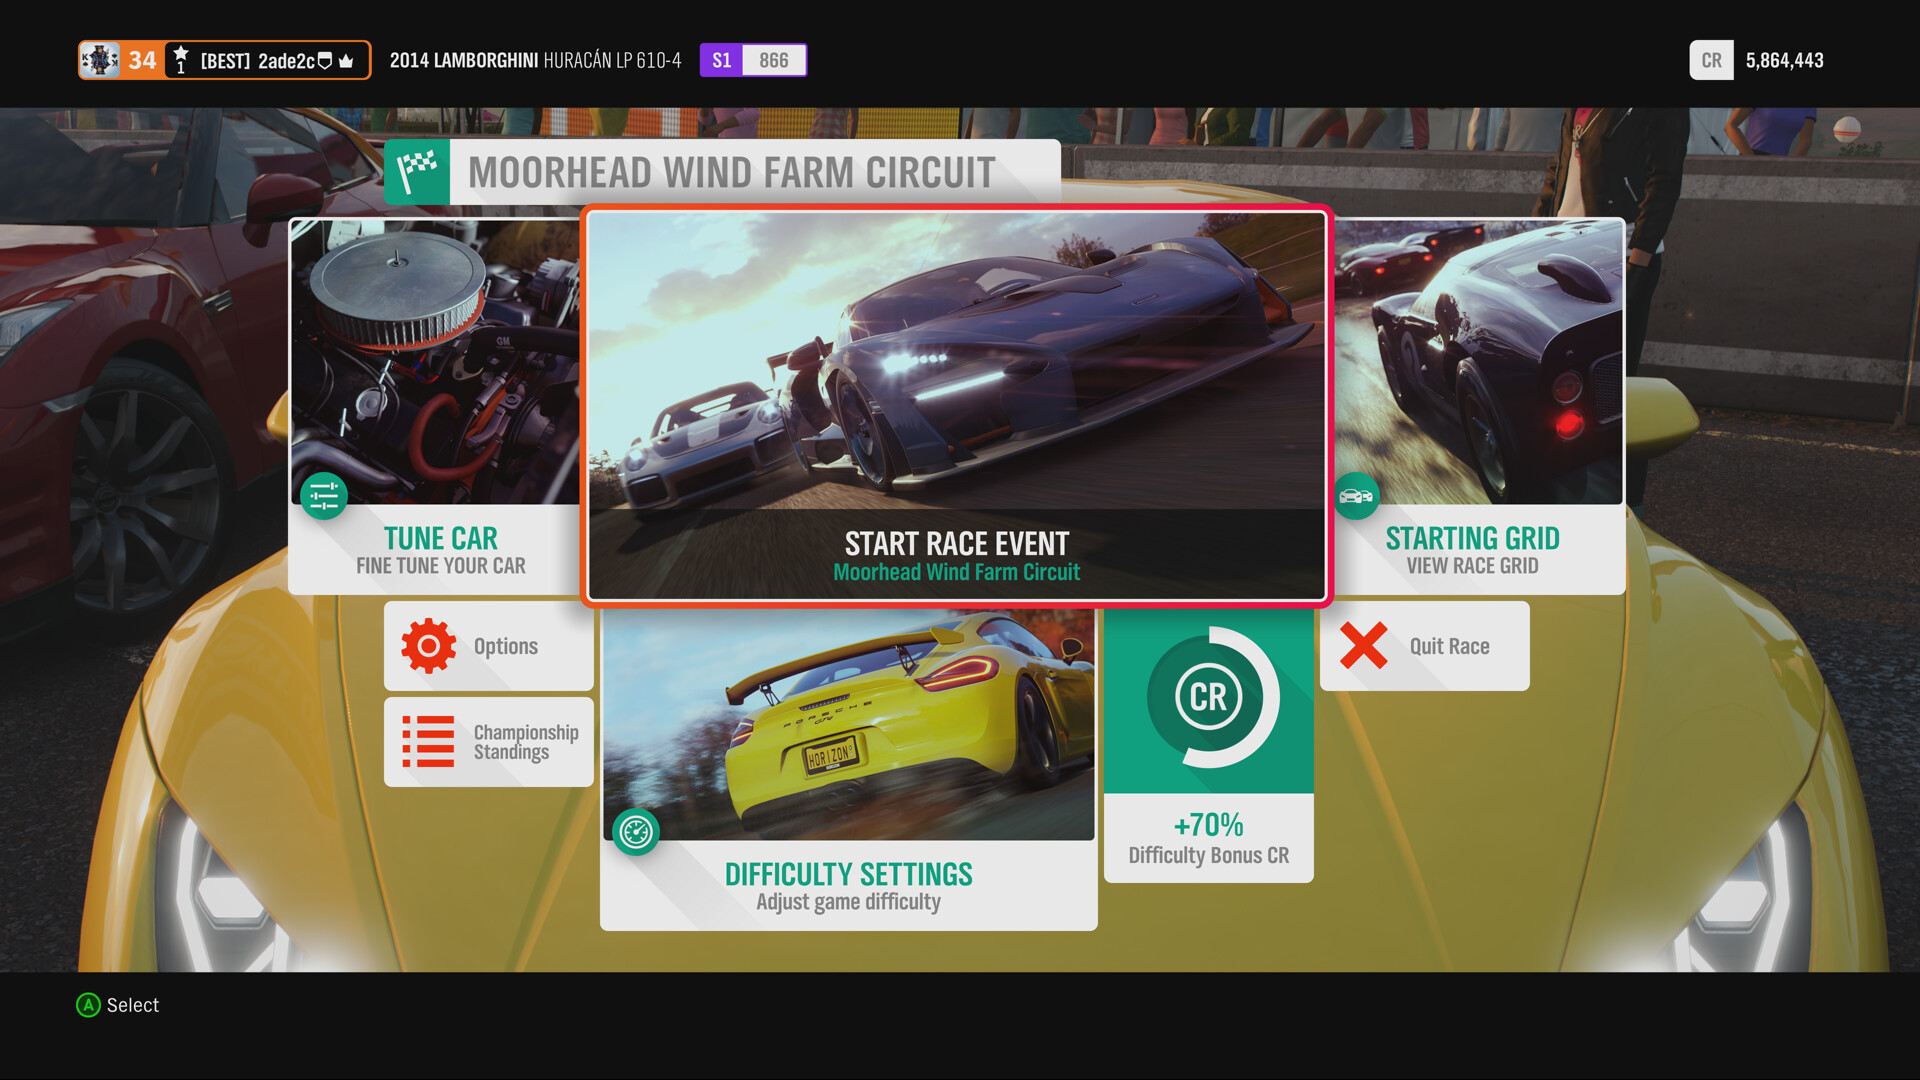 The Horizon 1-4 title screens as a choice to pick after this playlists ends  - Menus & Interface - Official Forza Community Forums